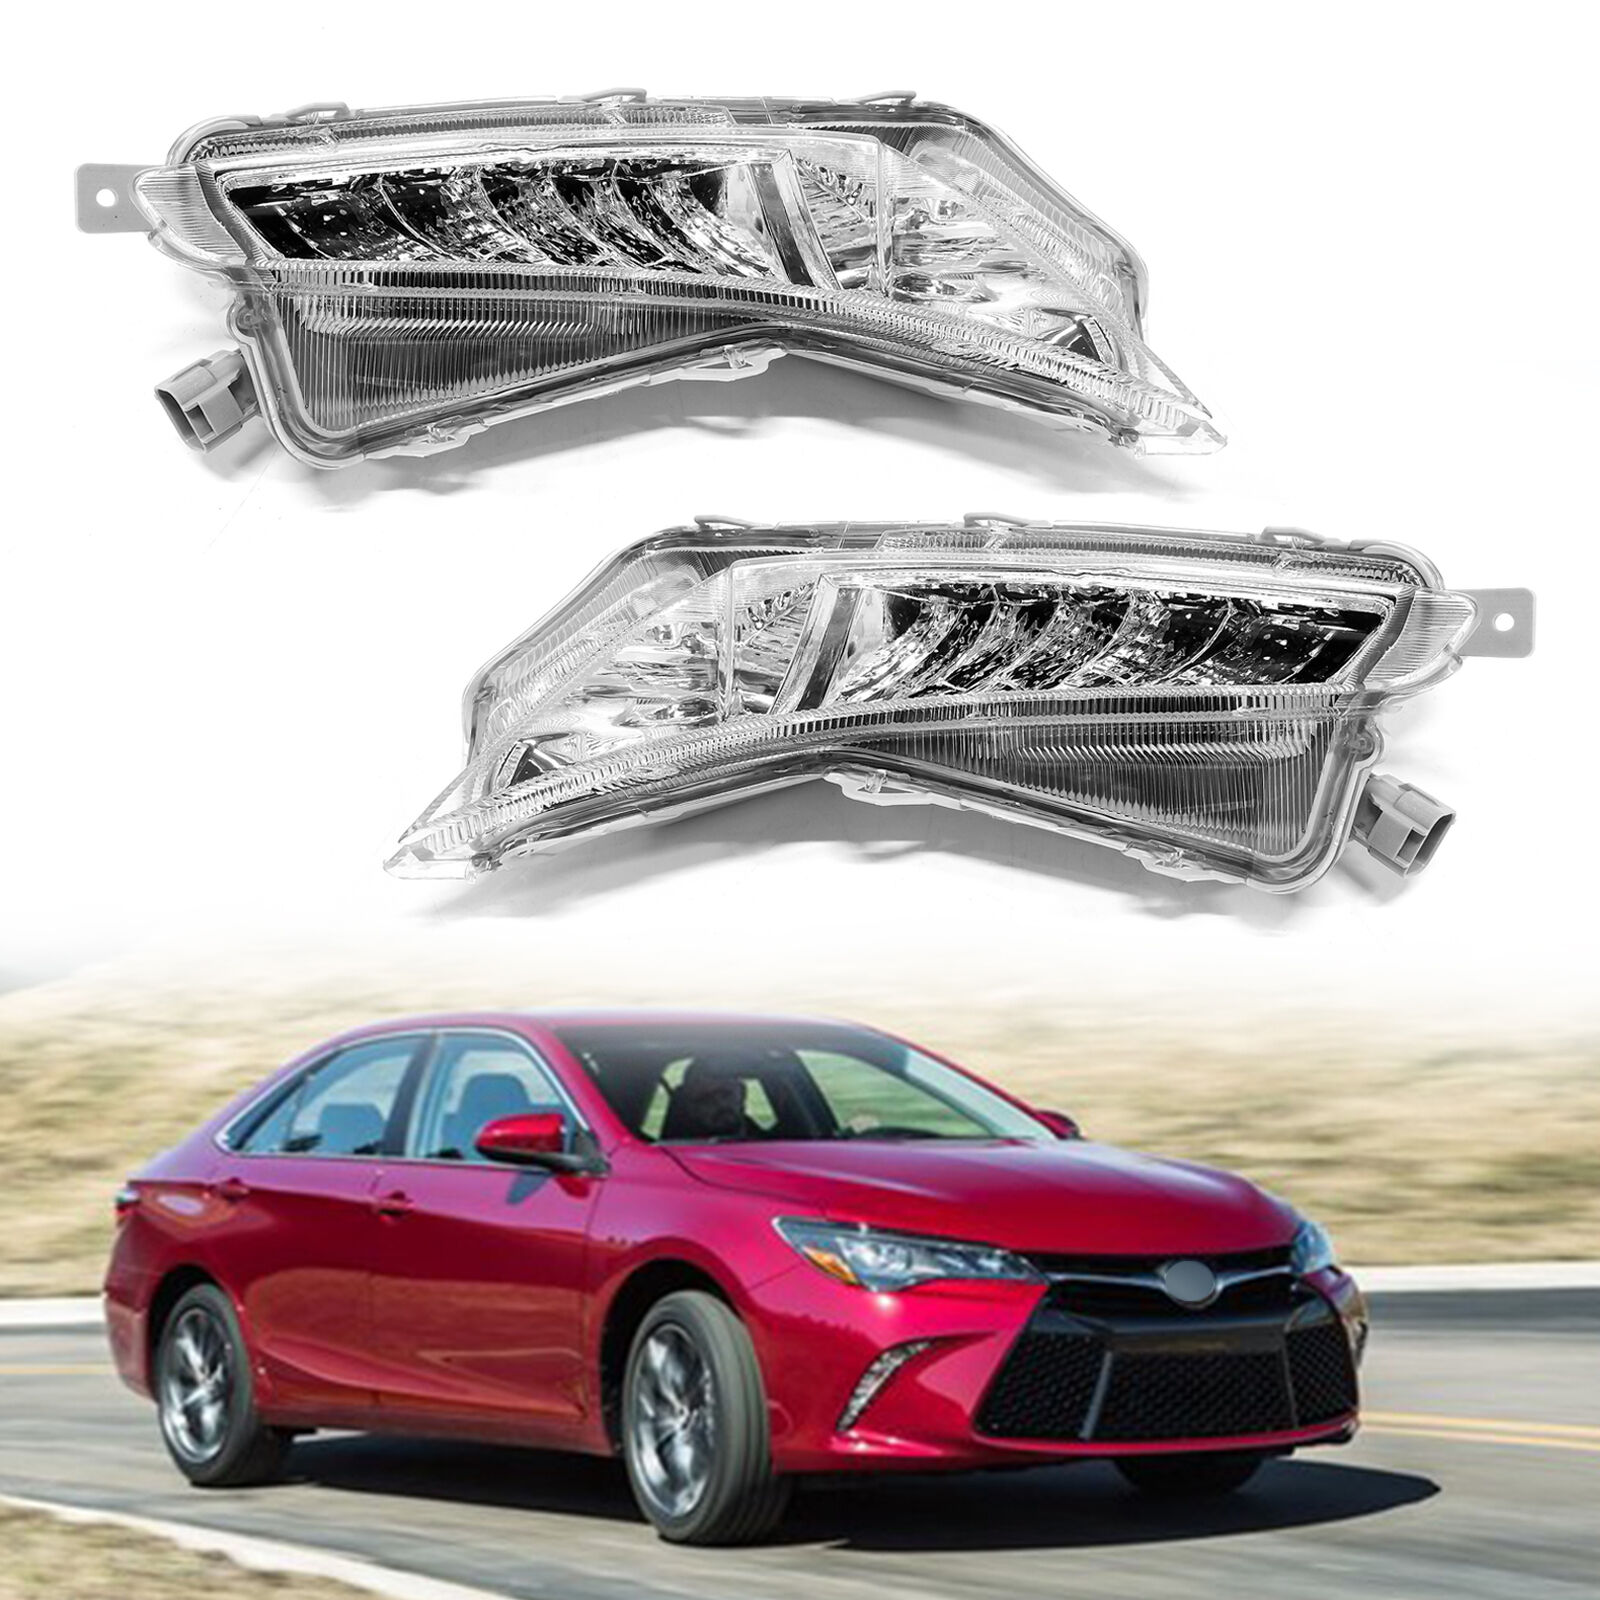 LED Fog Lights For 2015 2016 2017 Toyota Camry XLE XSE Front Bumper Lamps Pair